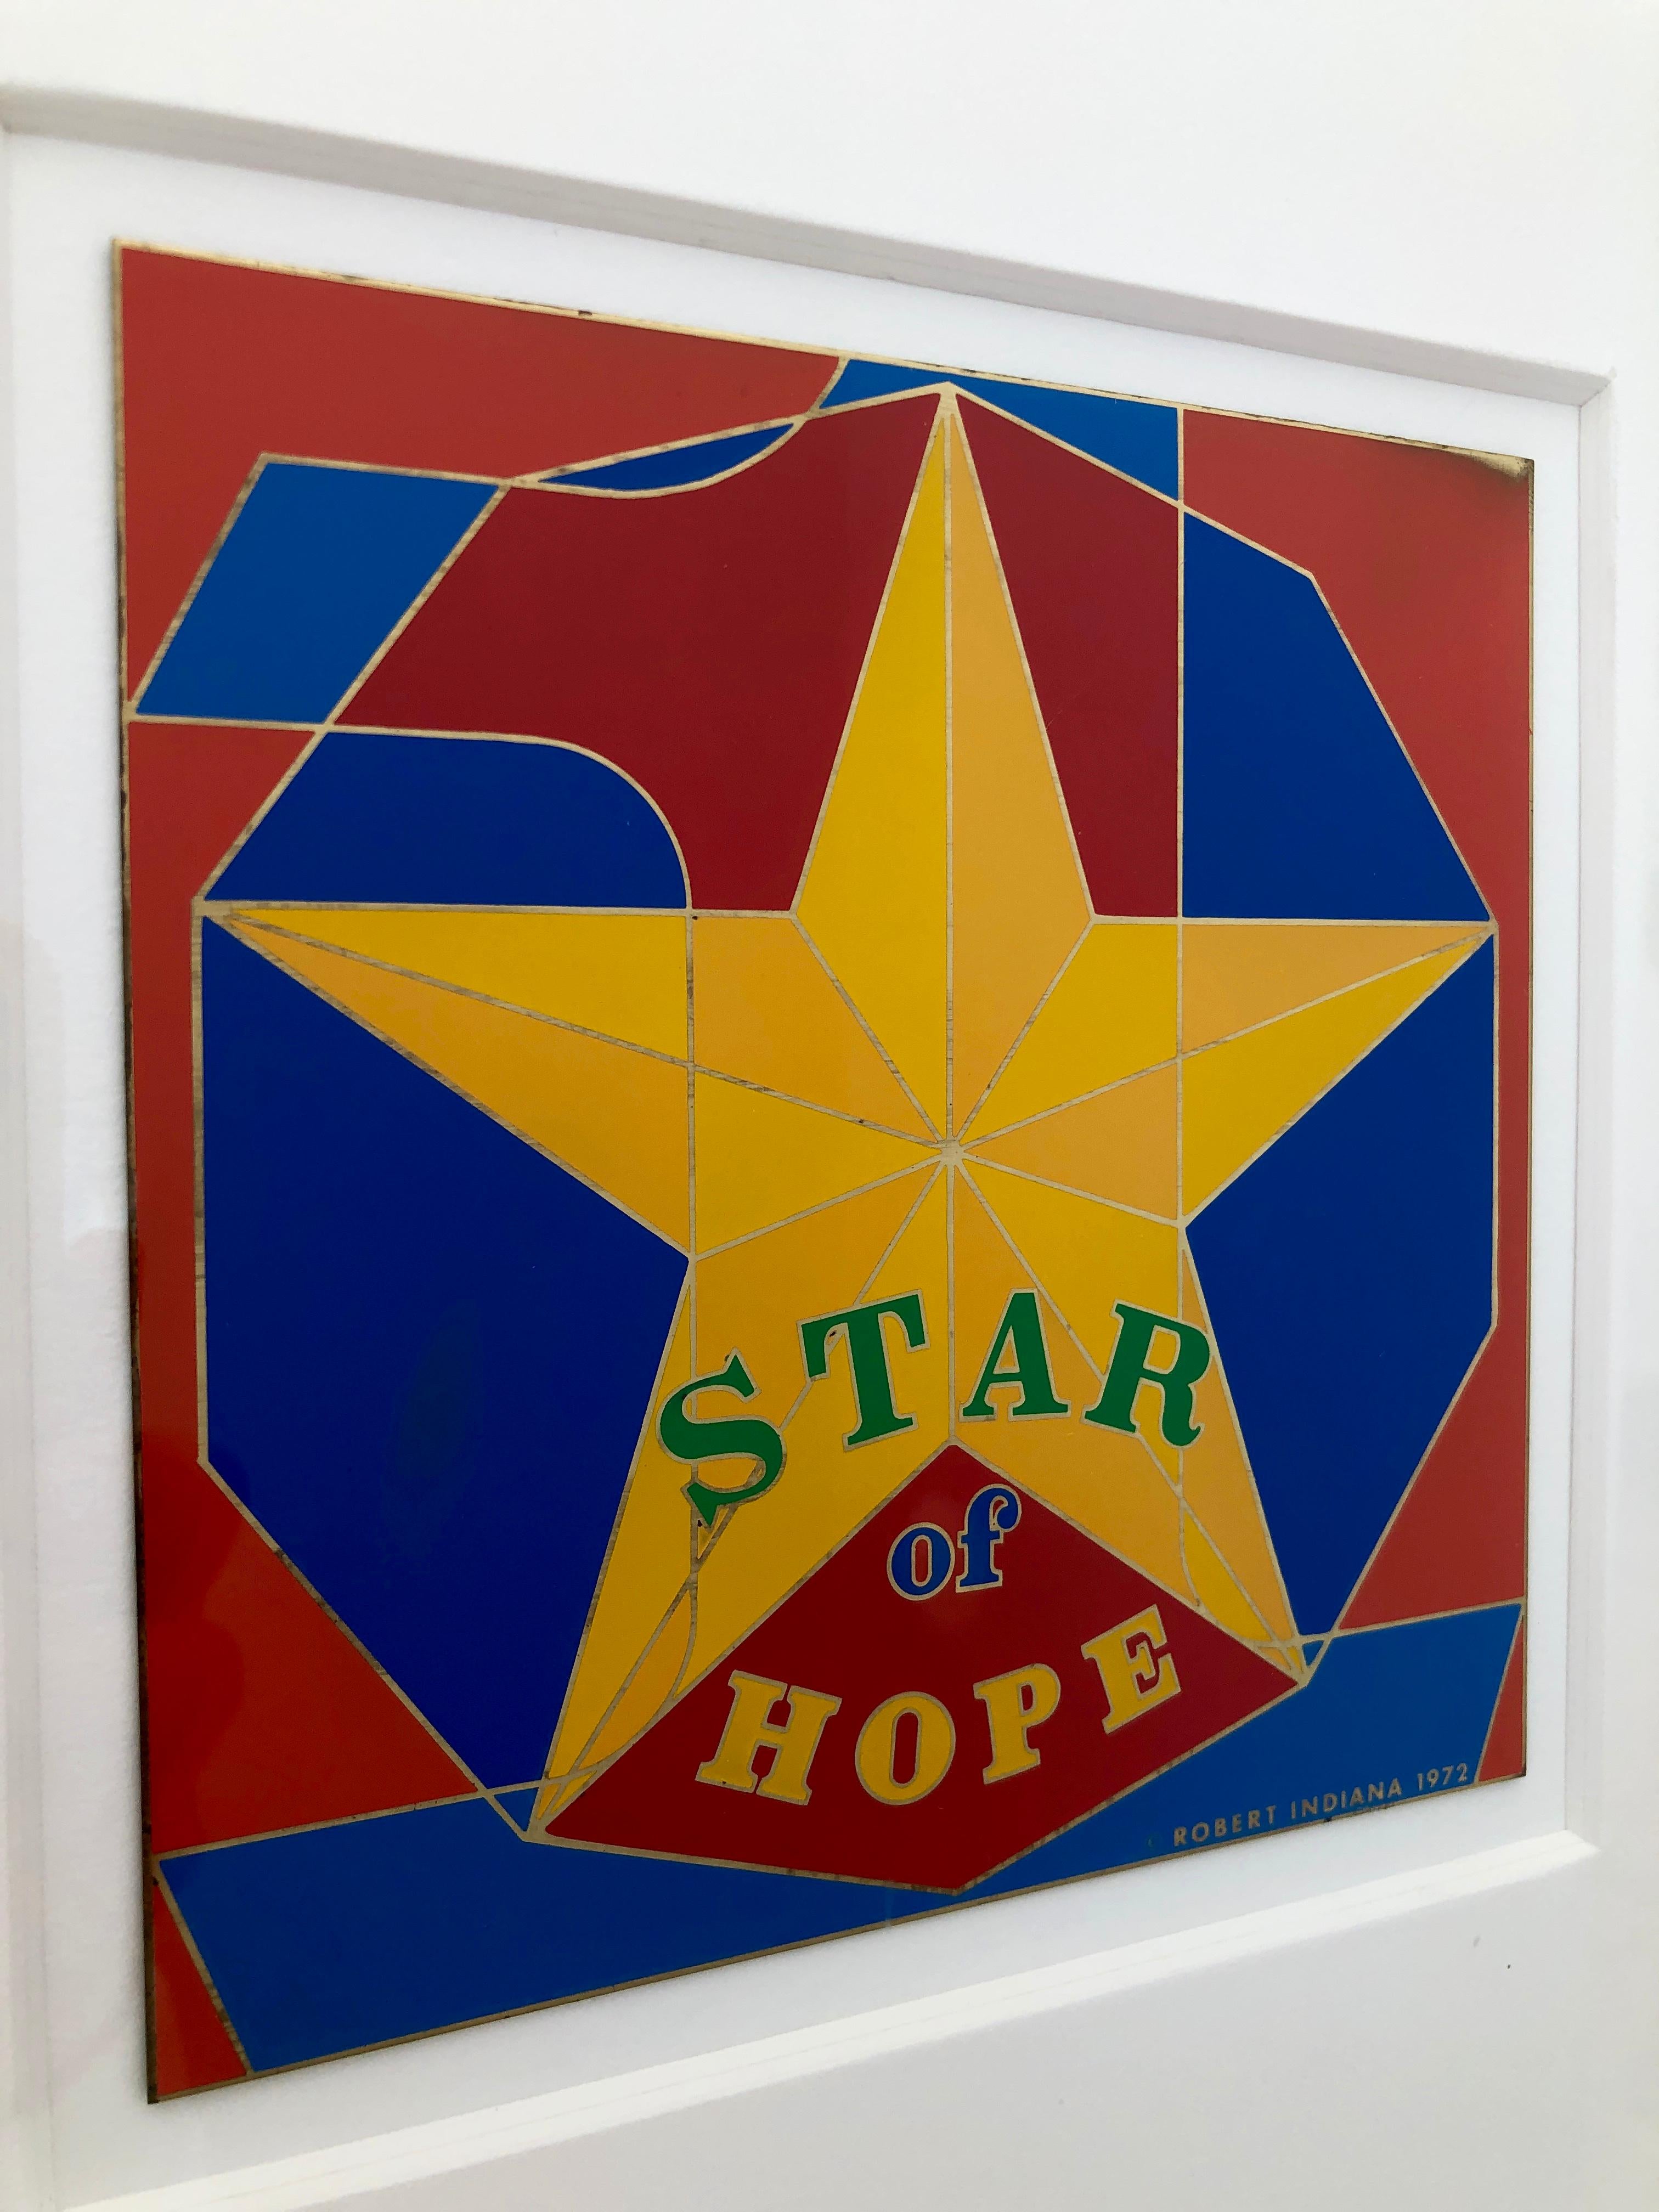 Offered is a framed in white midcentury Pop Art piece by Robert Indiana signed and dated with enamel on metal entitled, 